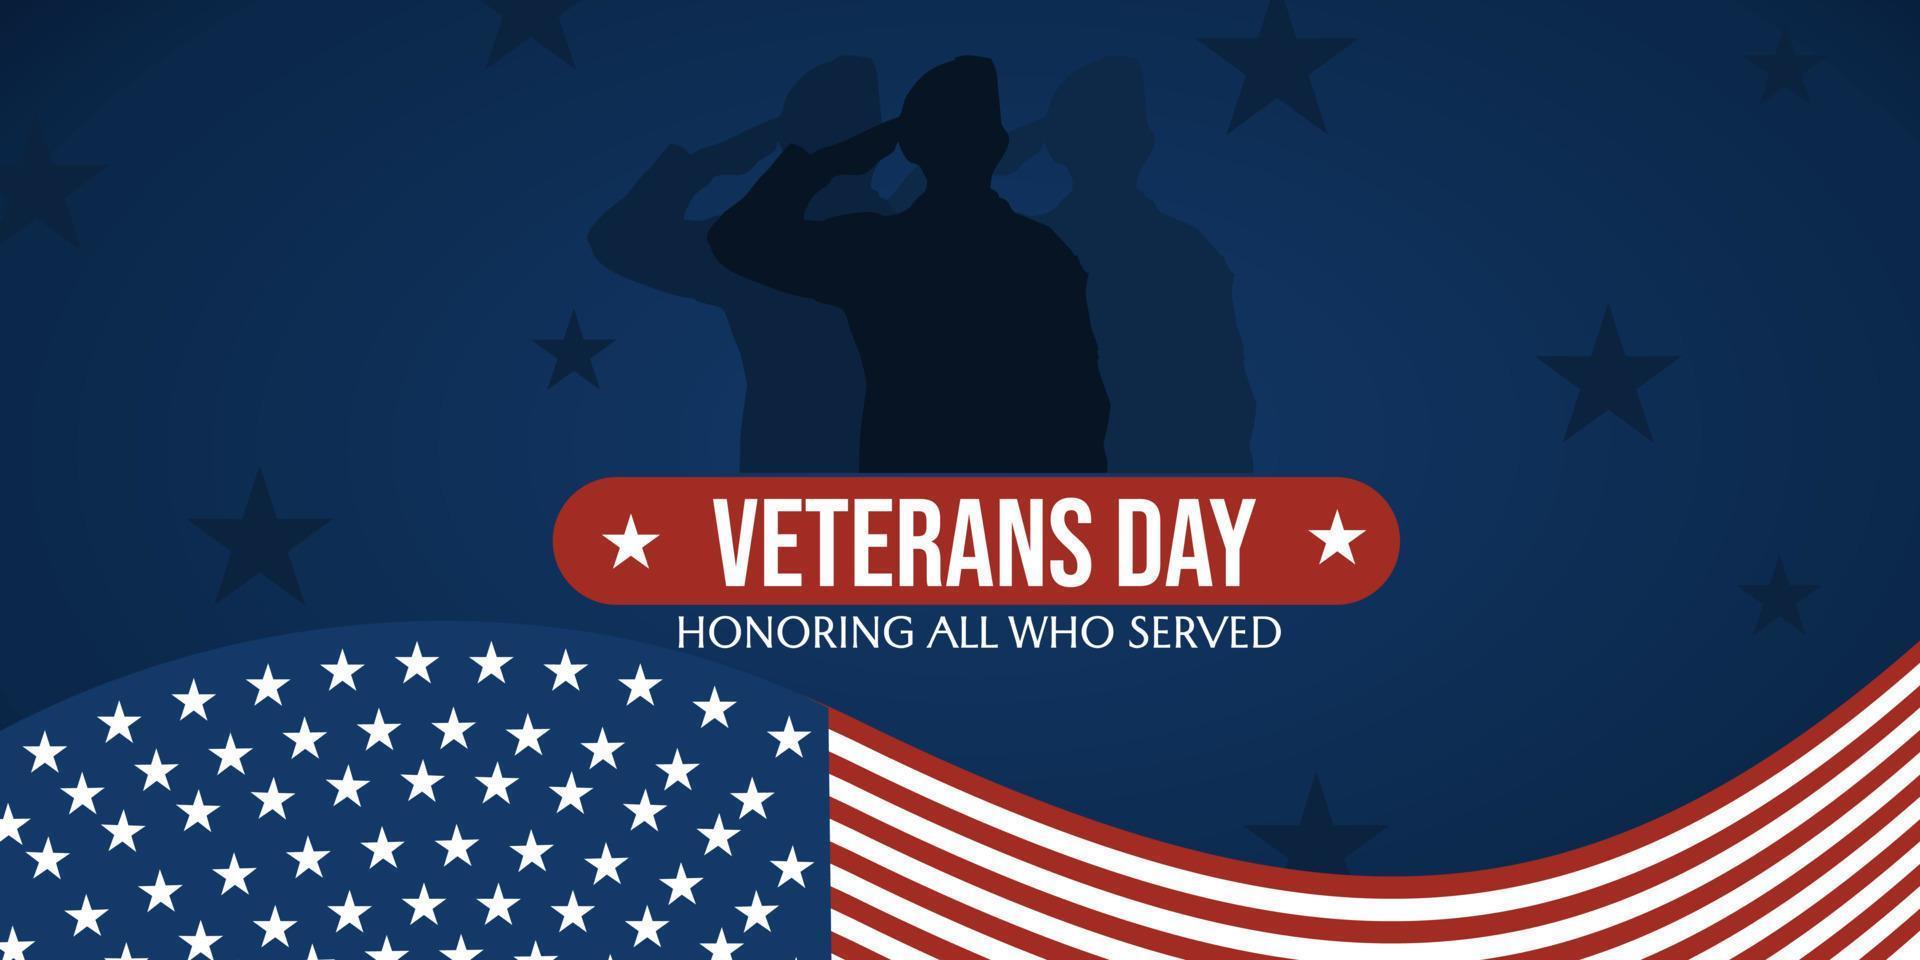 Veterans day banner. Honoring all who served. November 11. illustration with american flag and soldier silhouette vector